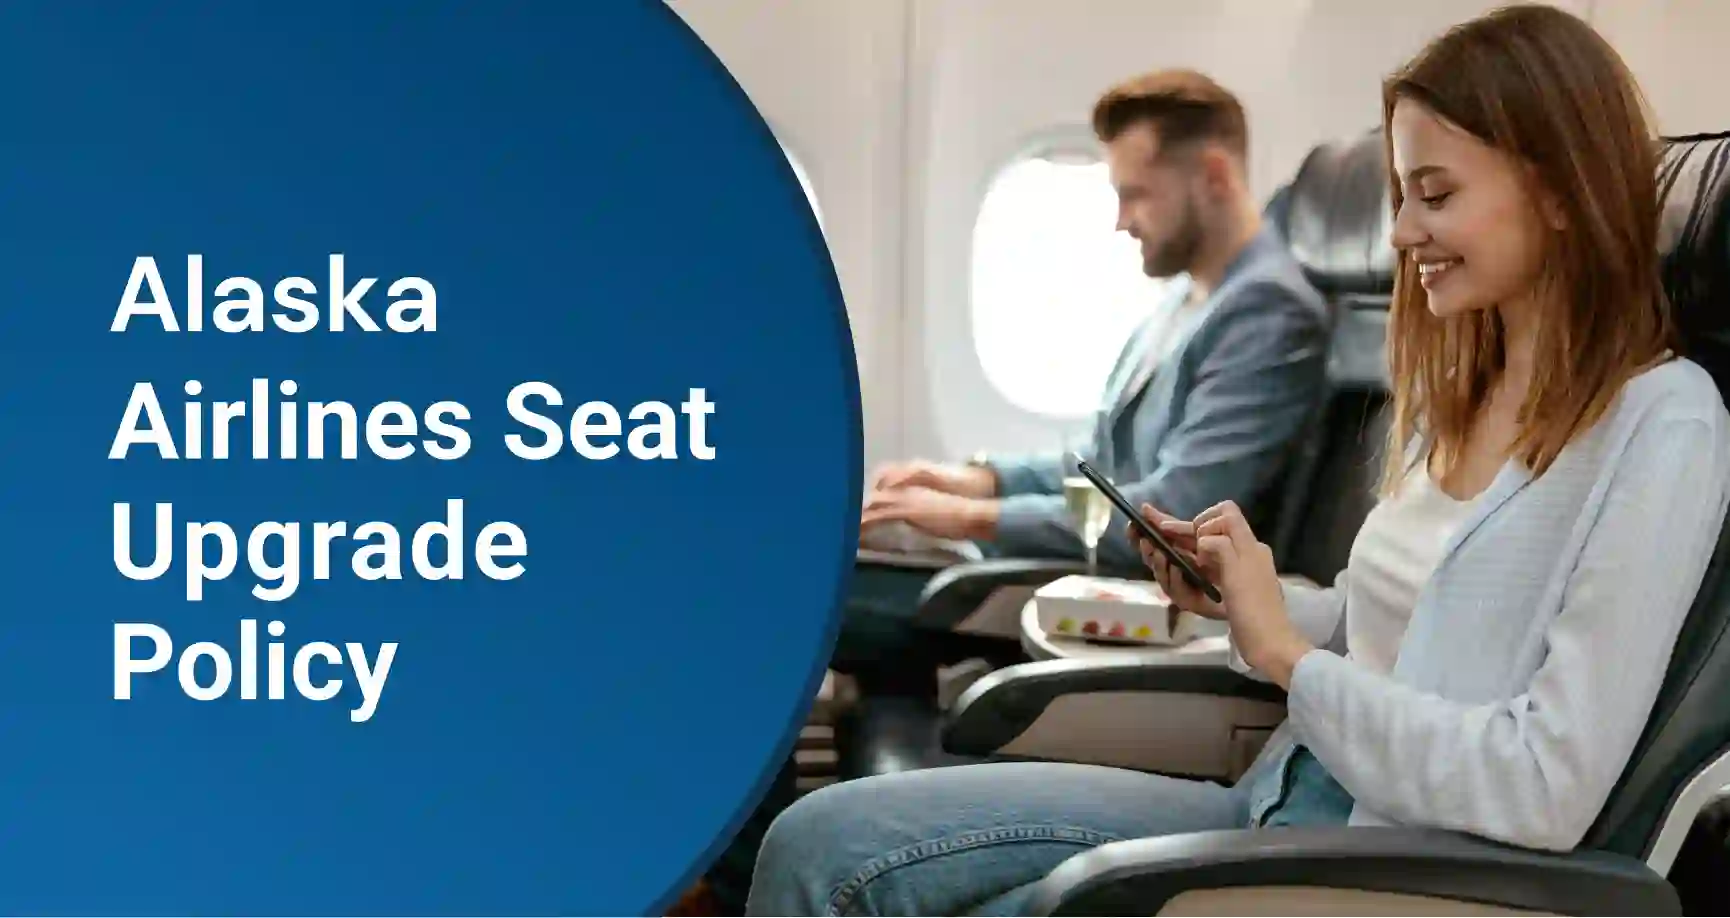 Alaska Airlines Seat Upgrade Policy